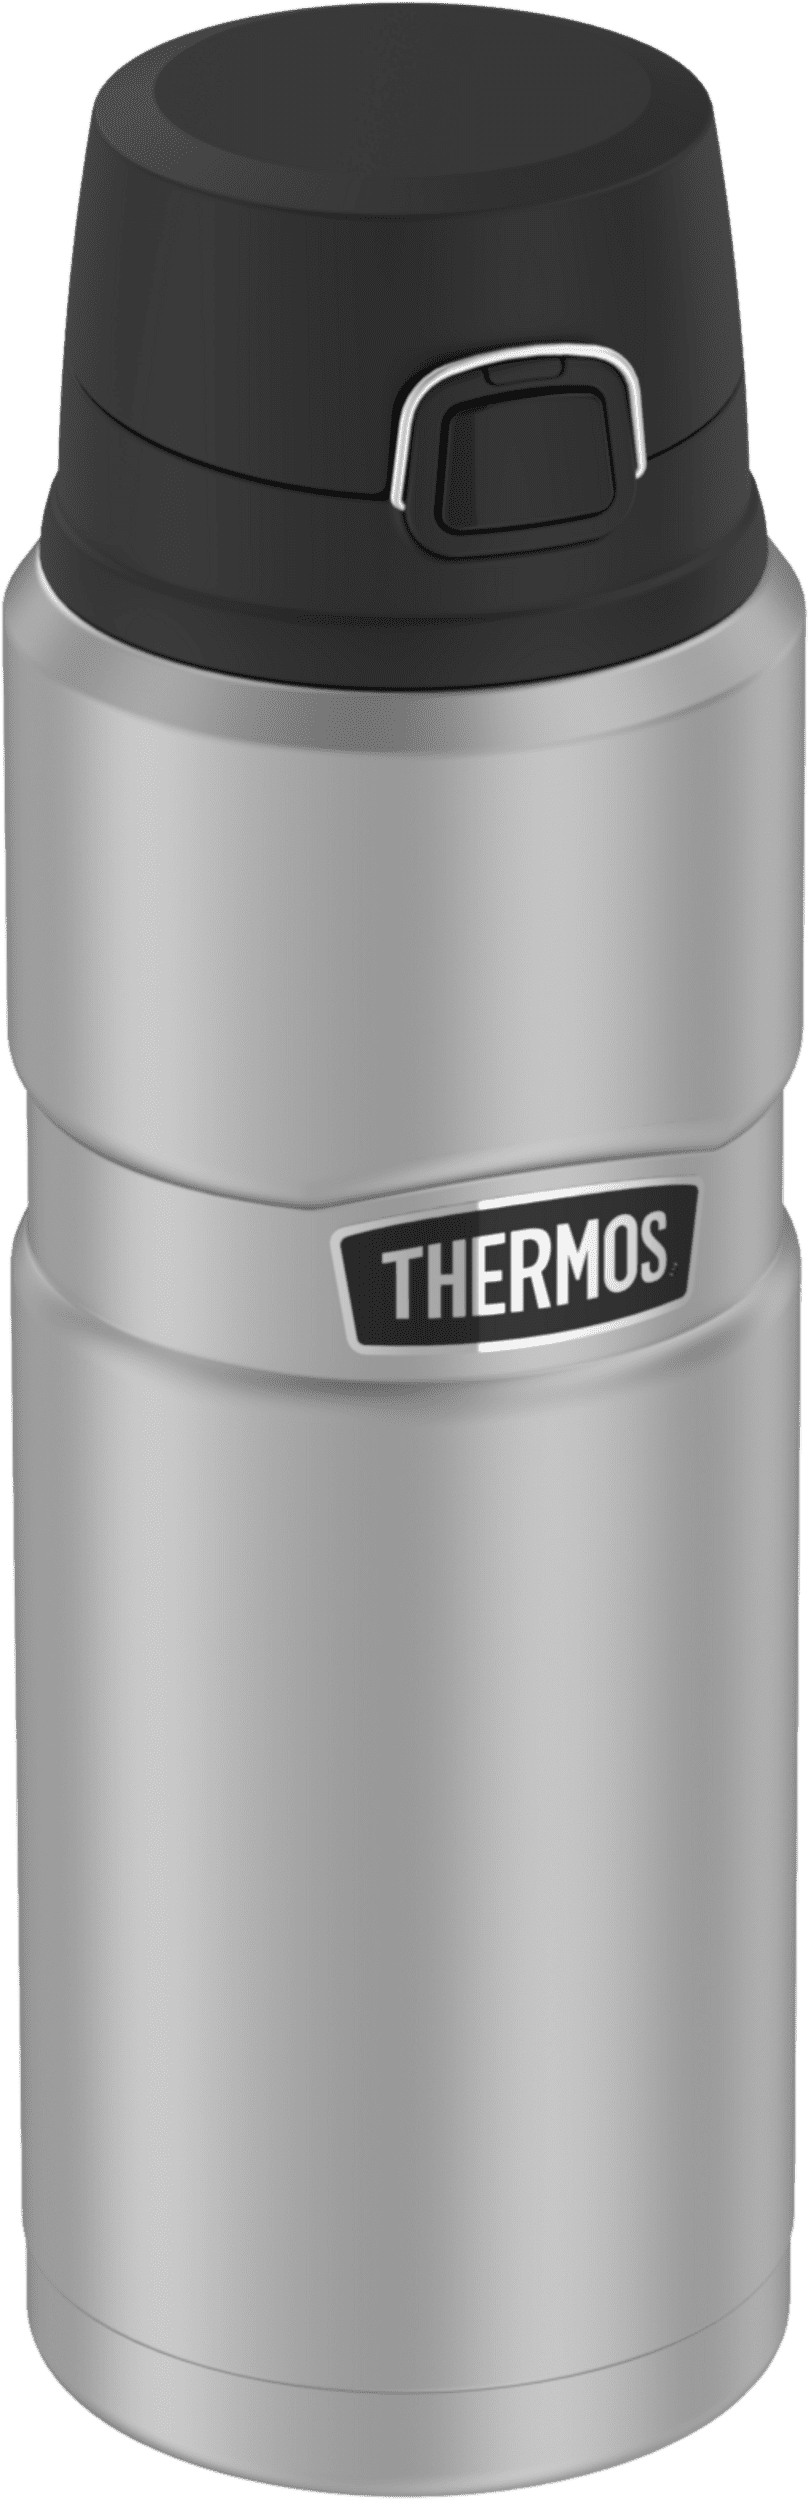 Thermos Isoliertrinkflasche Stainless King steel 0,7l, ansicht